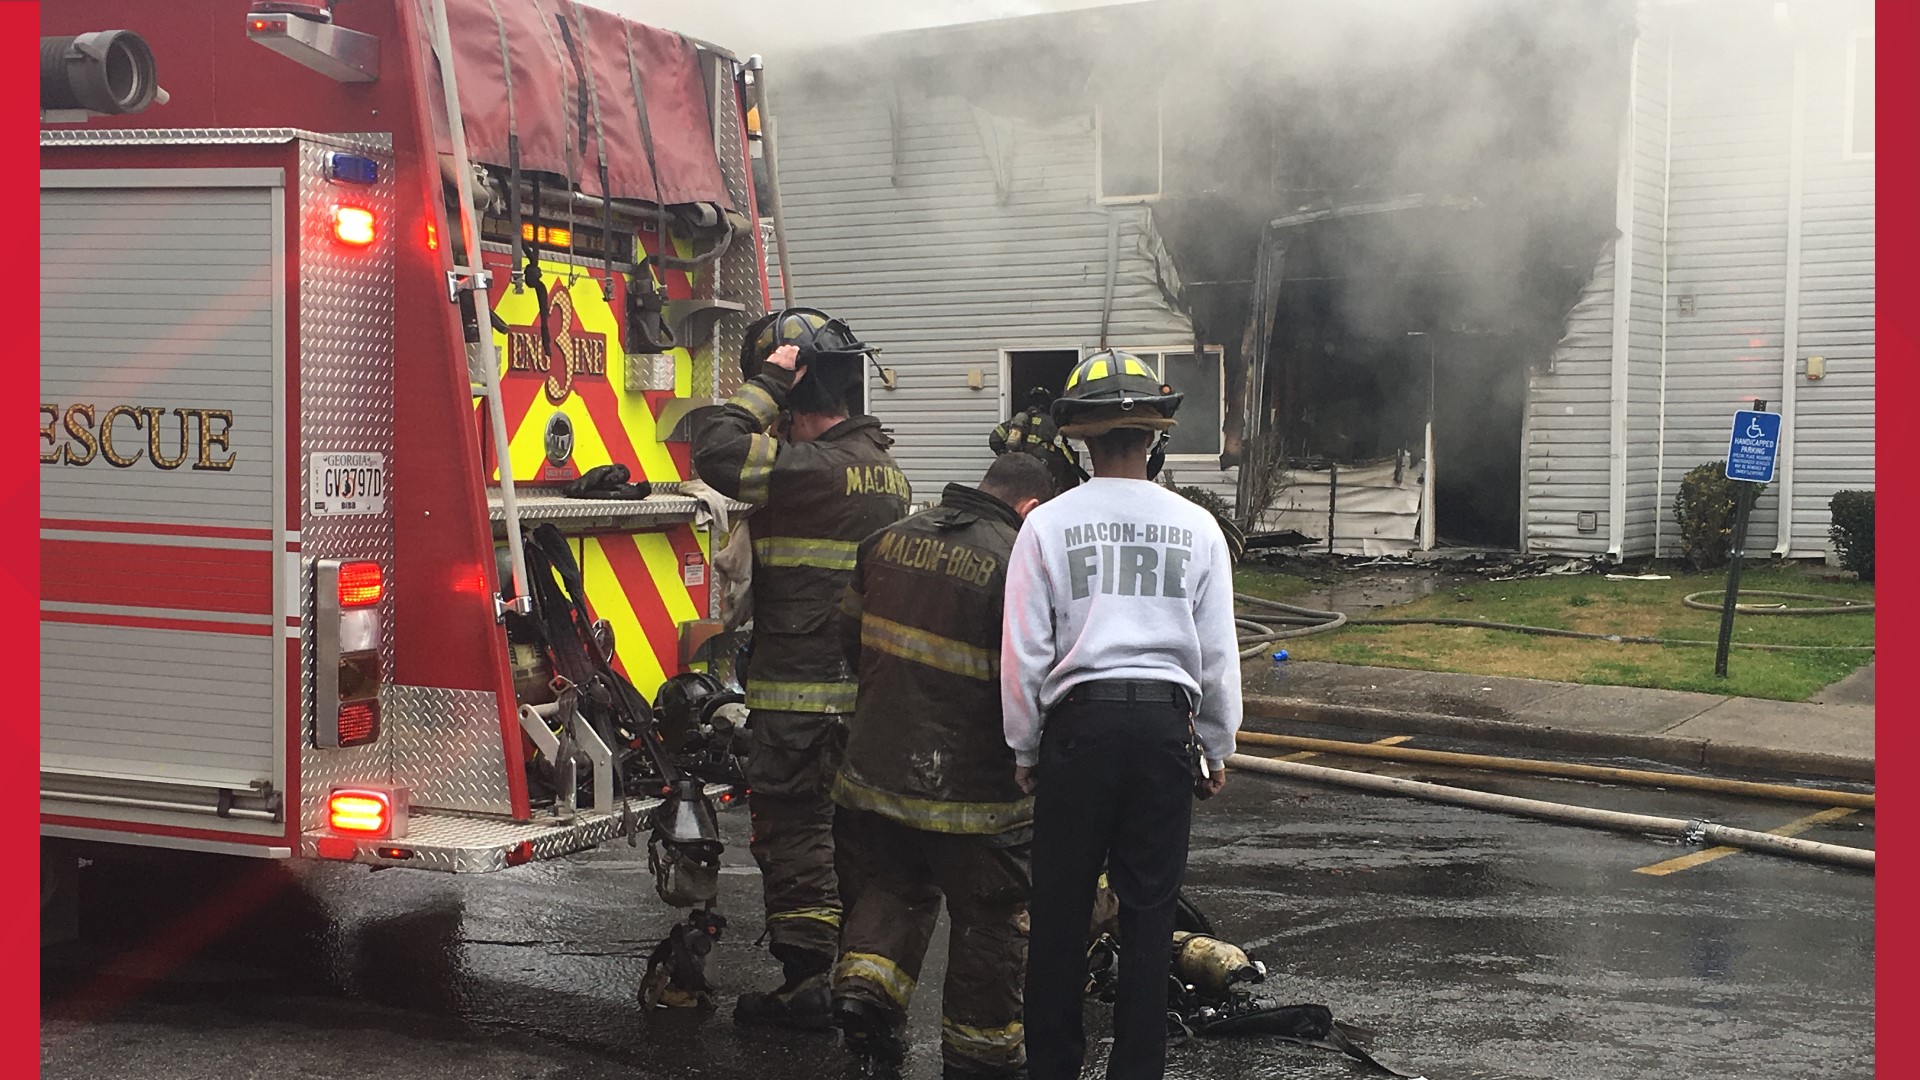 An apartment complex off Log Cabin Drive caught fire Wednesday morning, damaging several units.